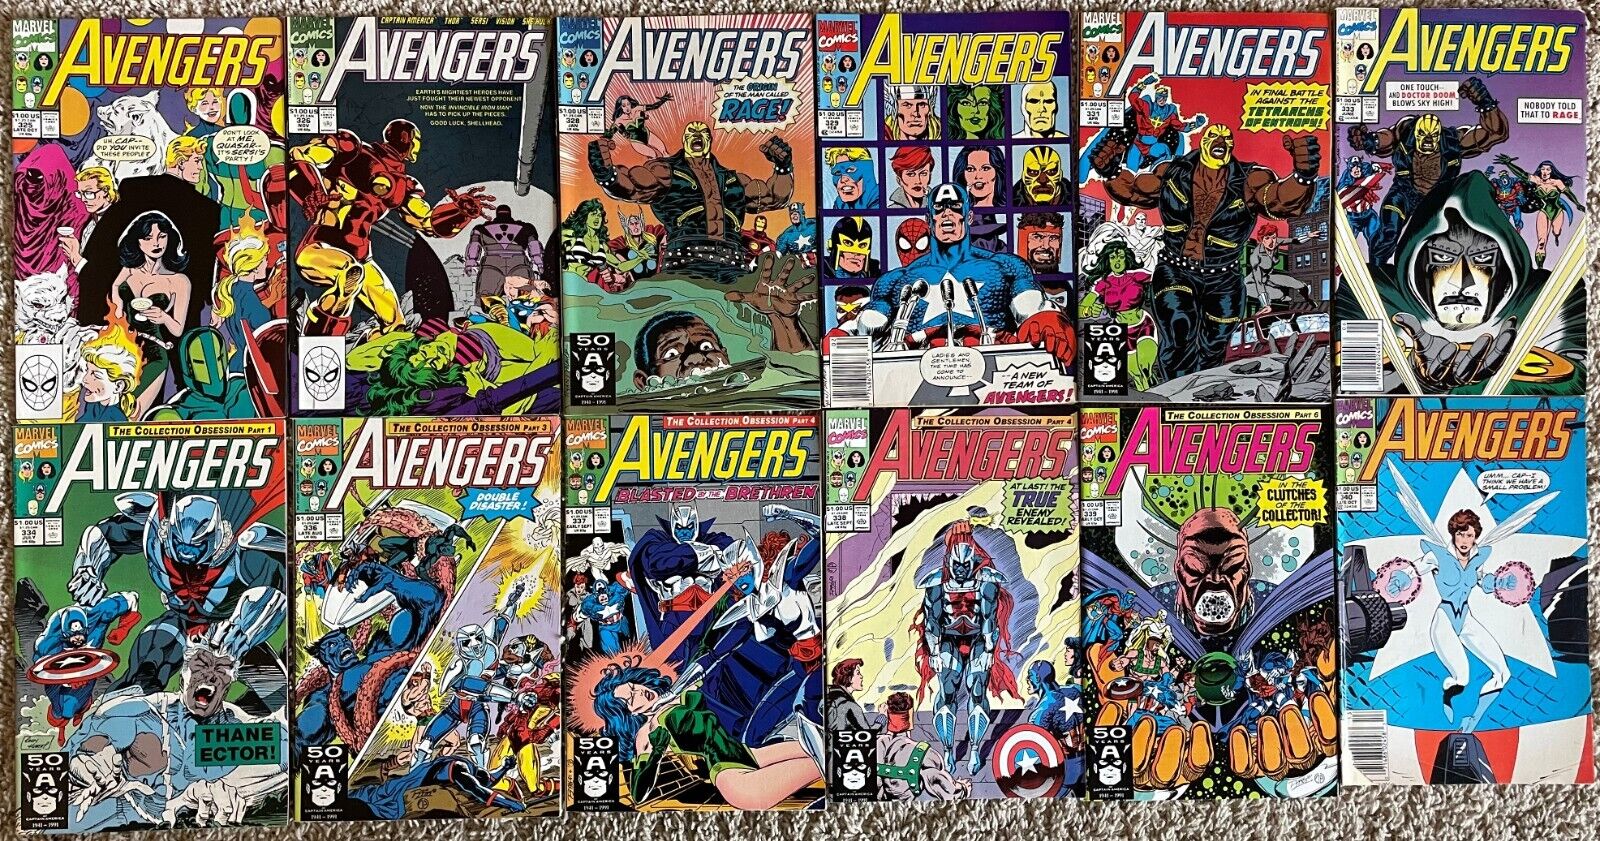 Avengers Lot #10 Marvel comic series from the 1970s